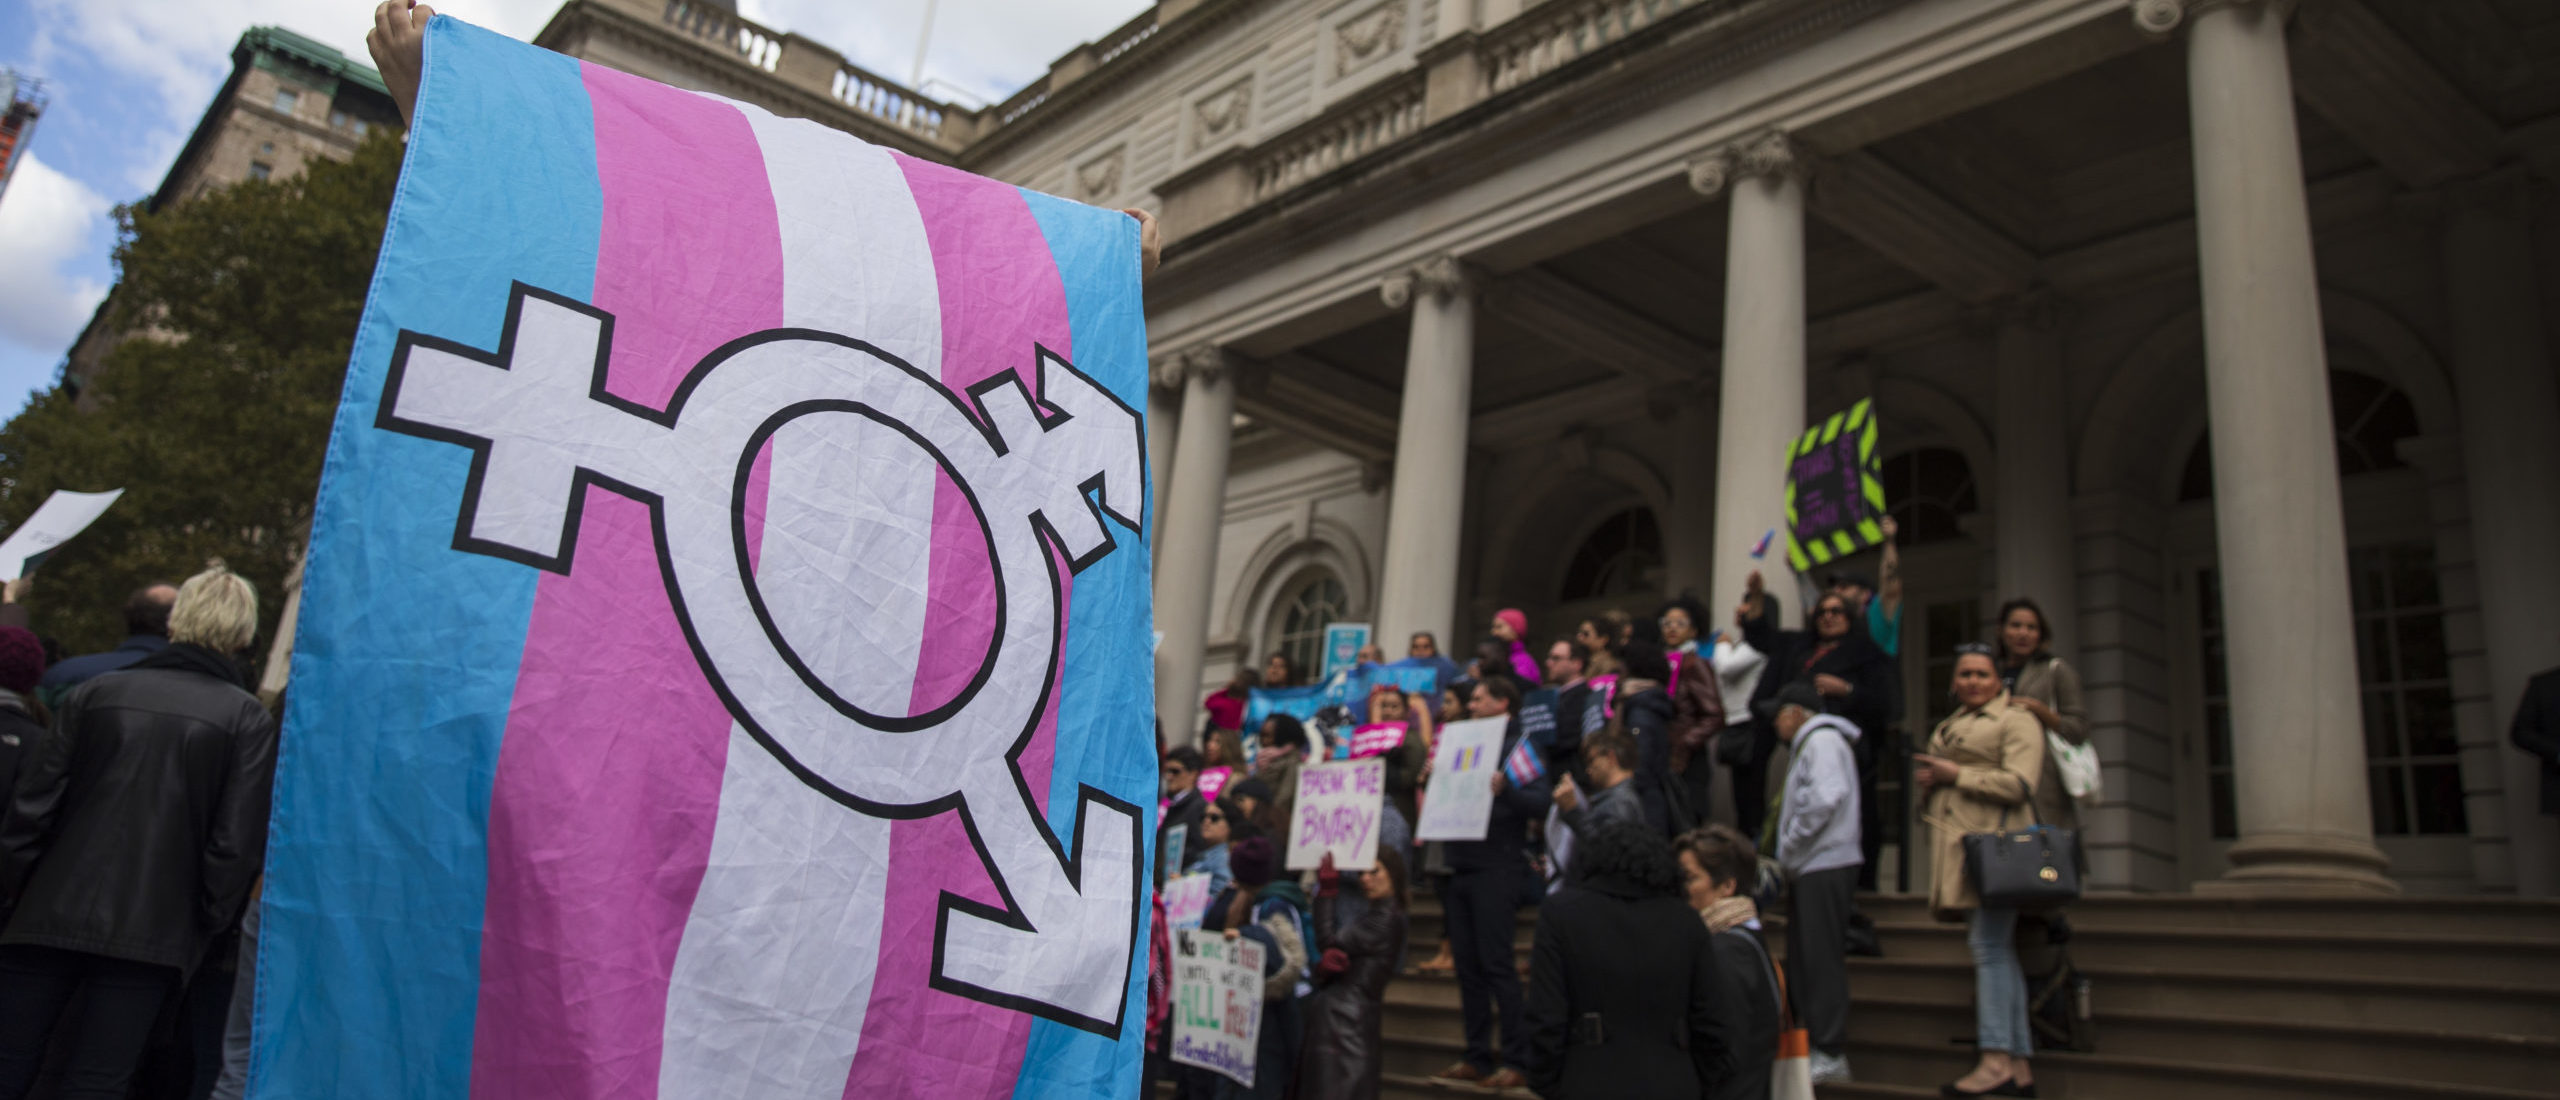 NEW YORK, NY - OCTOBER 24: L.G.B.T. activists and their supporters rally in support of transgender people on the steps of New York City Hall, October 24, 2018 in New York City. (Photo by Drew Angerer/Getty Images)